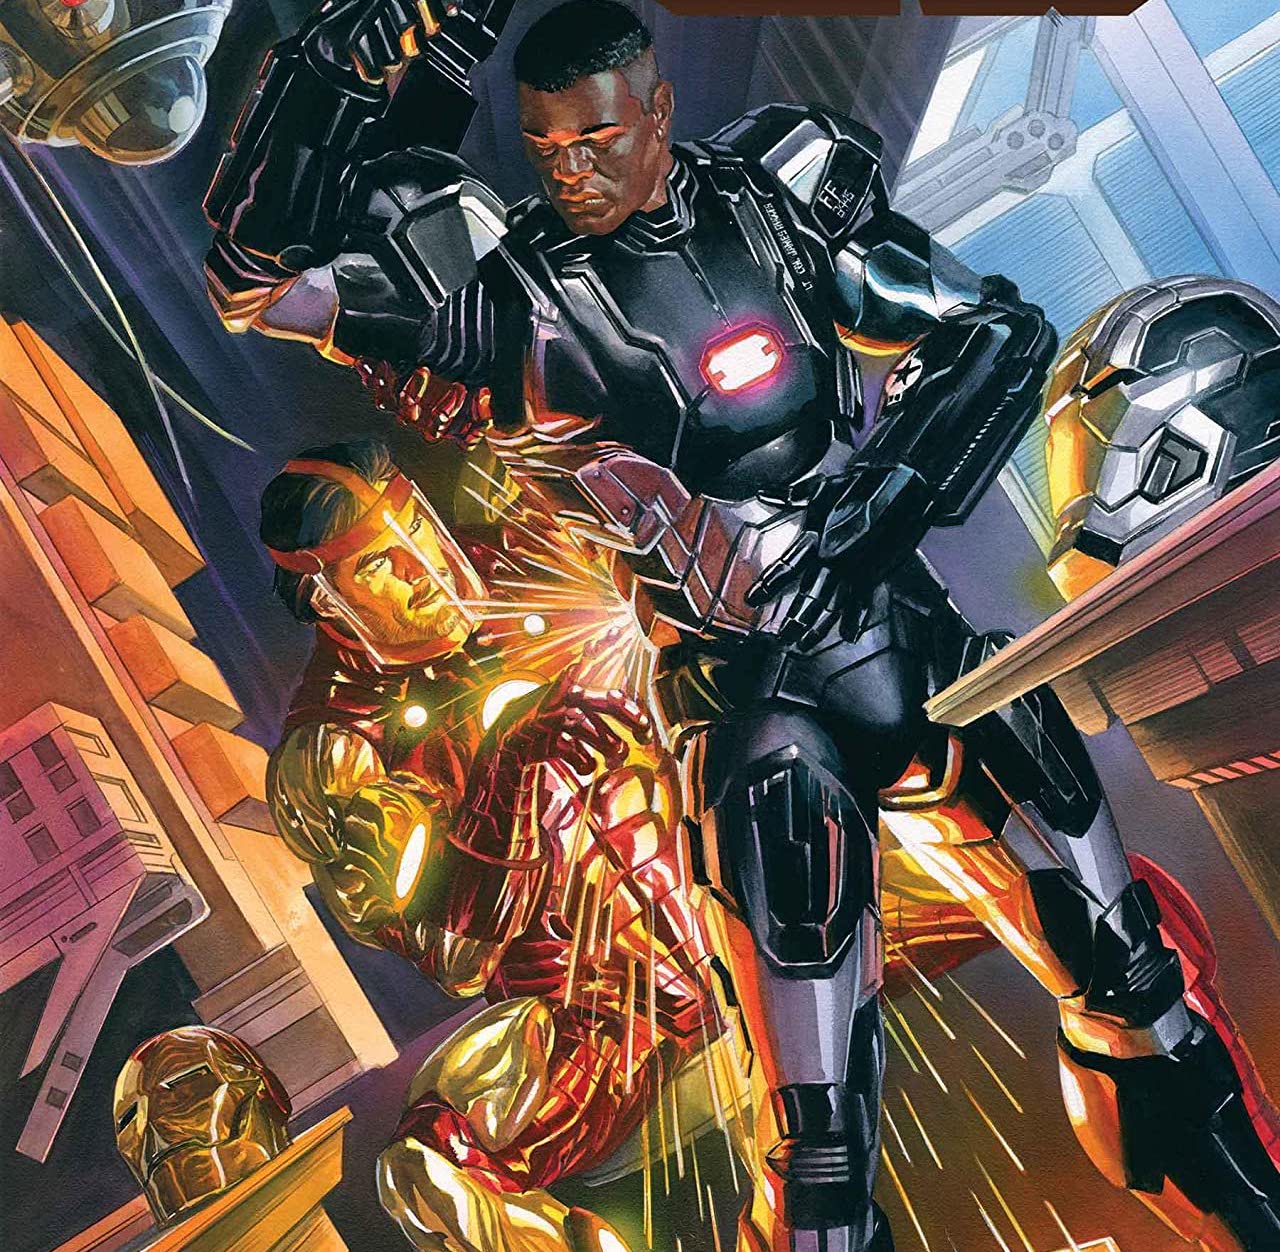 'Iron Man' #7 juggles spectacle, stakes, and sci-fi